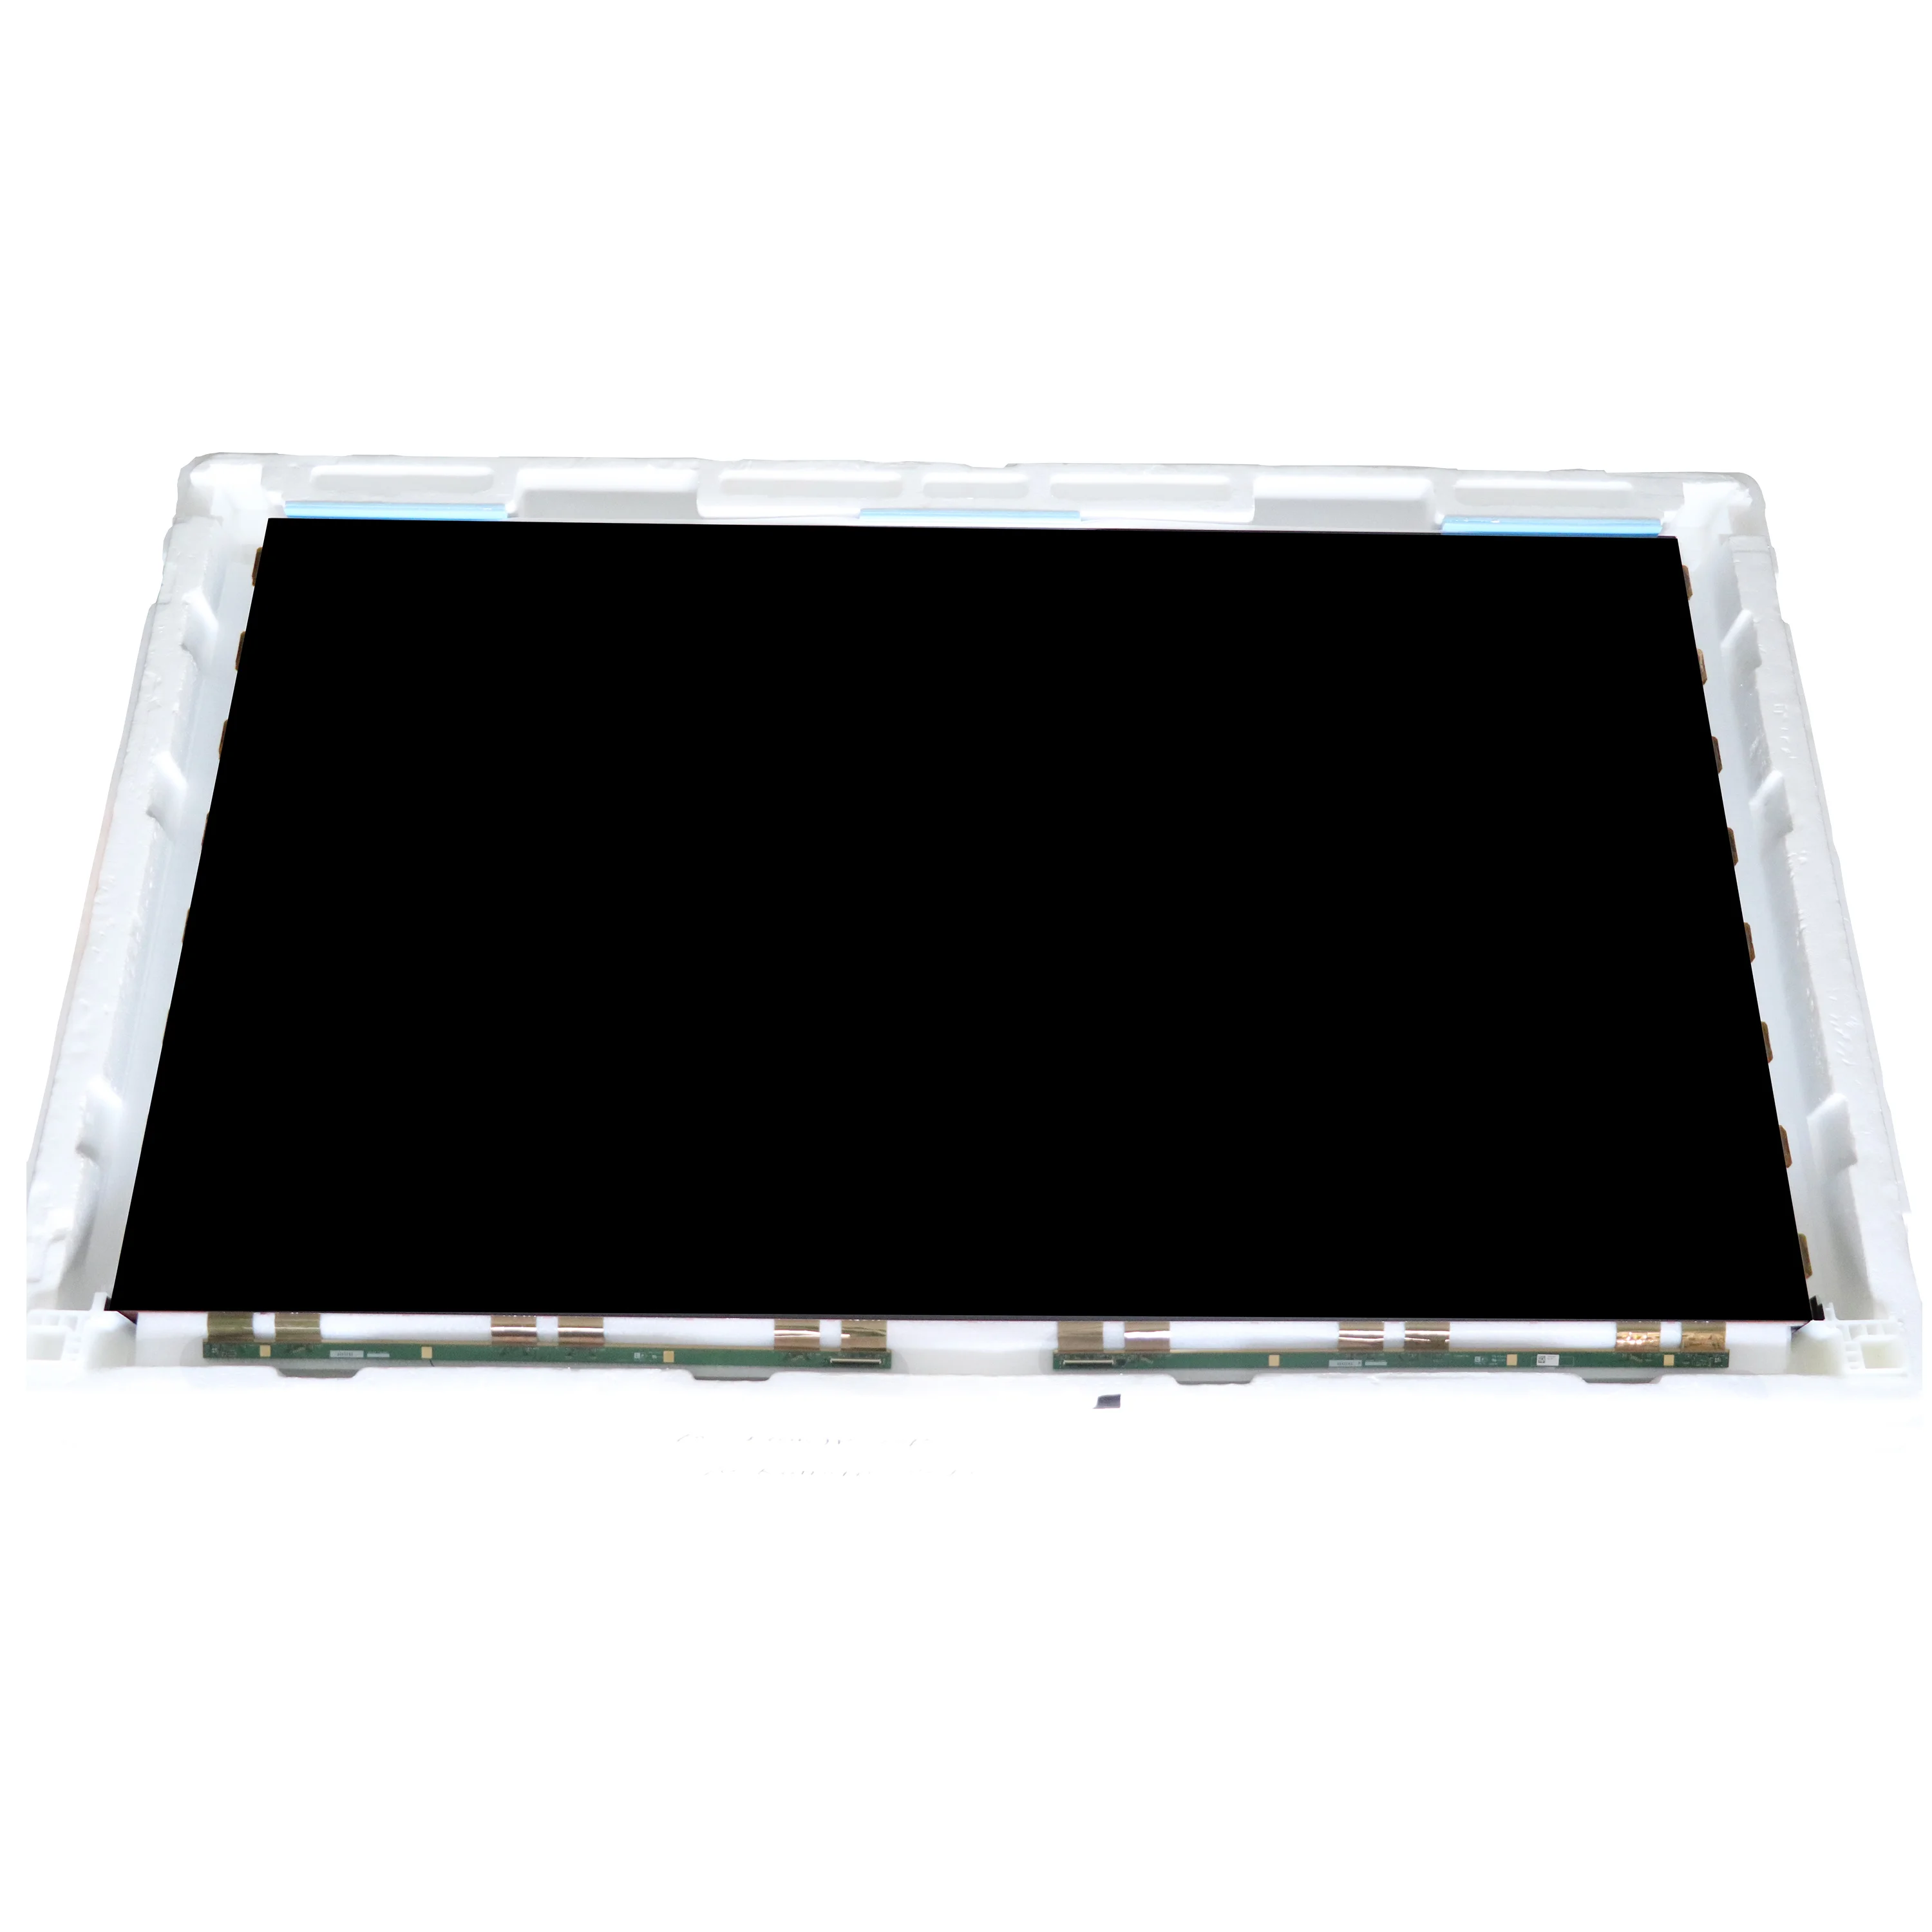 Open cell replacement for Sharp tv 75inch LED TV  K6109TP K0298FV K6110TP K0299FV LCD-70SU575A